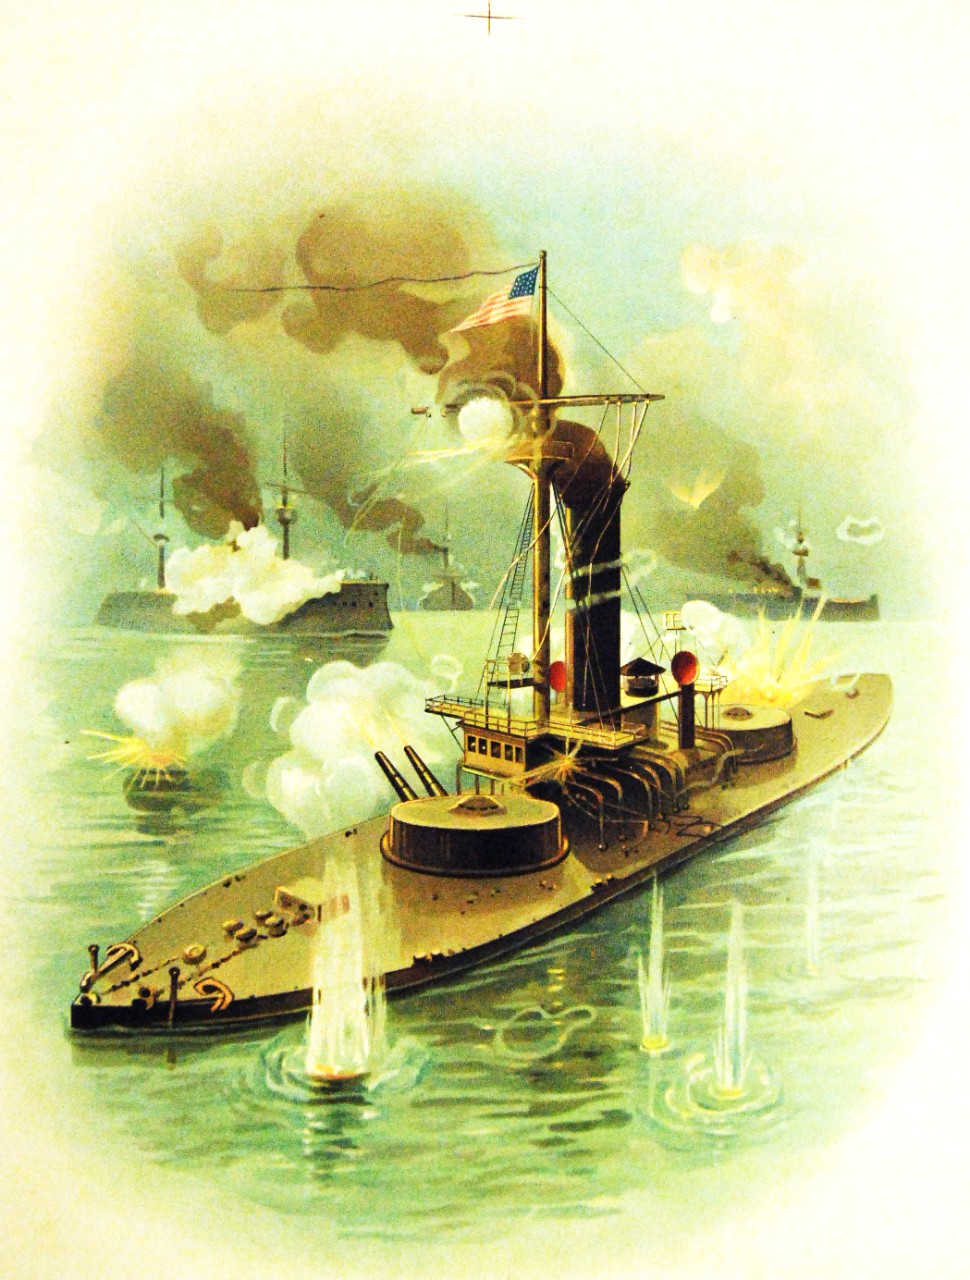 LC-Lot 4812-21:  USS Miantonomoh (Monitor #5), 1898.   Firing her turret guns.  Though this image has Miantonomoh in battle, she did not see any action during the Spanish-American War.   Reproduction of a painting by Koerner & Hayes, circa 98. Courtesy of the Library of Congress.   (2015/7/24). 